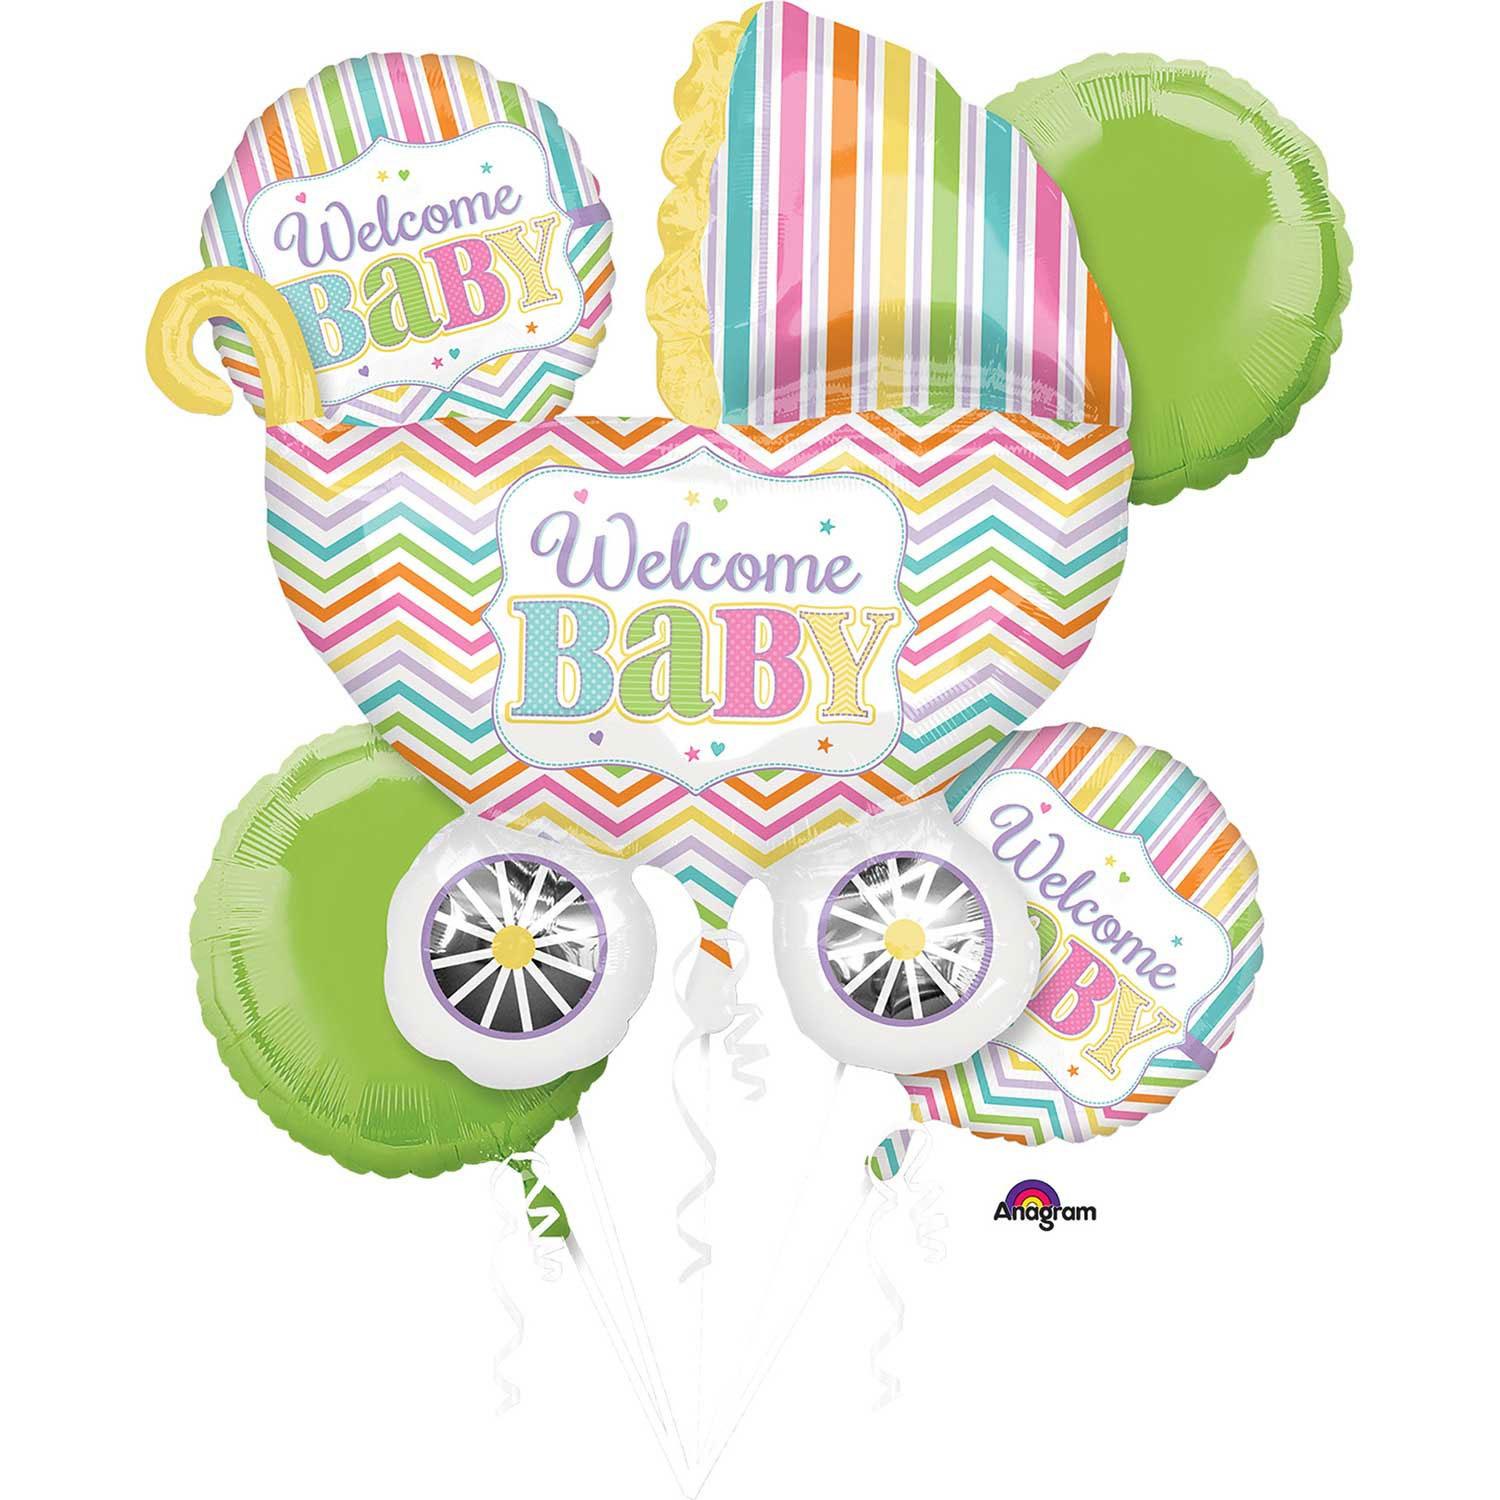 Baby Brights Welcome Baby Foil Balloon Bouquet 5pc by Amscan 3091701 available here at Karnival Costumes online party shop